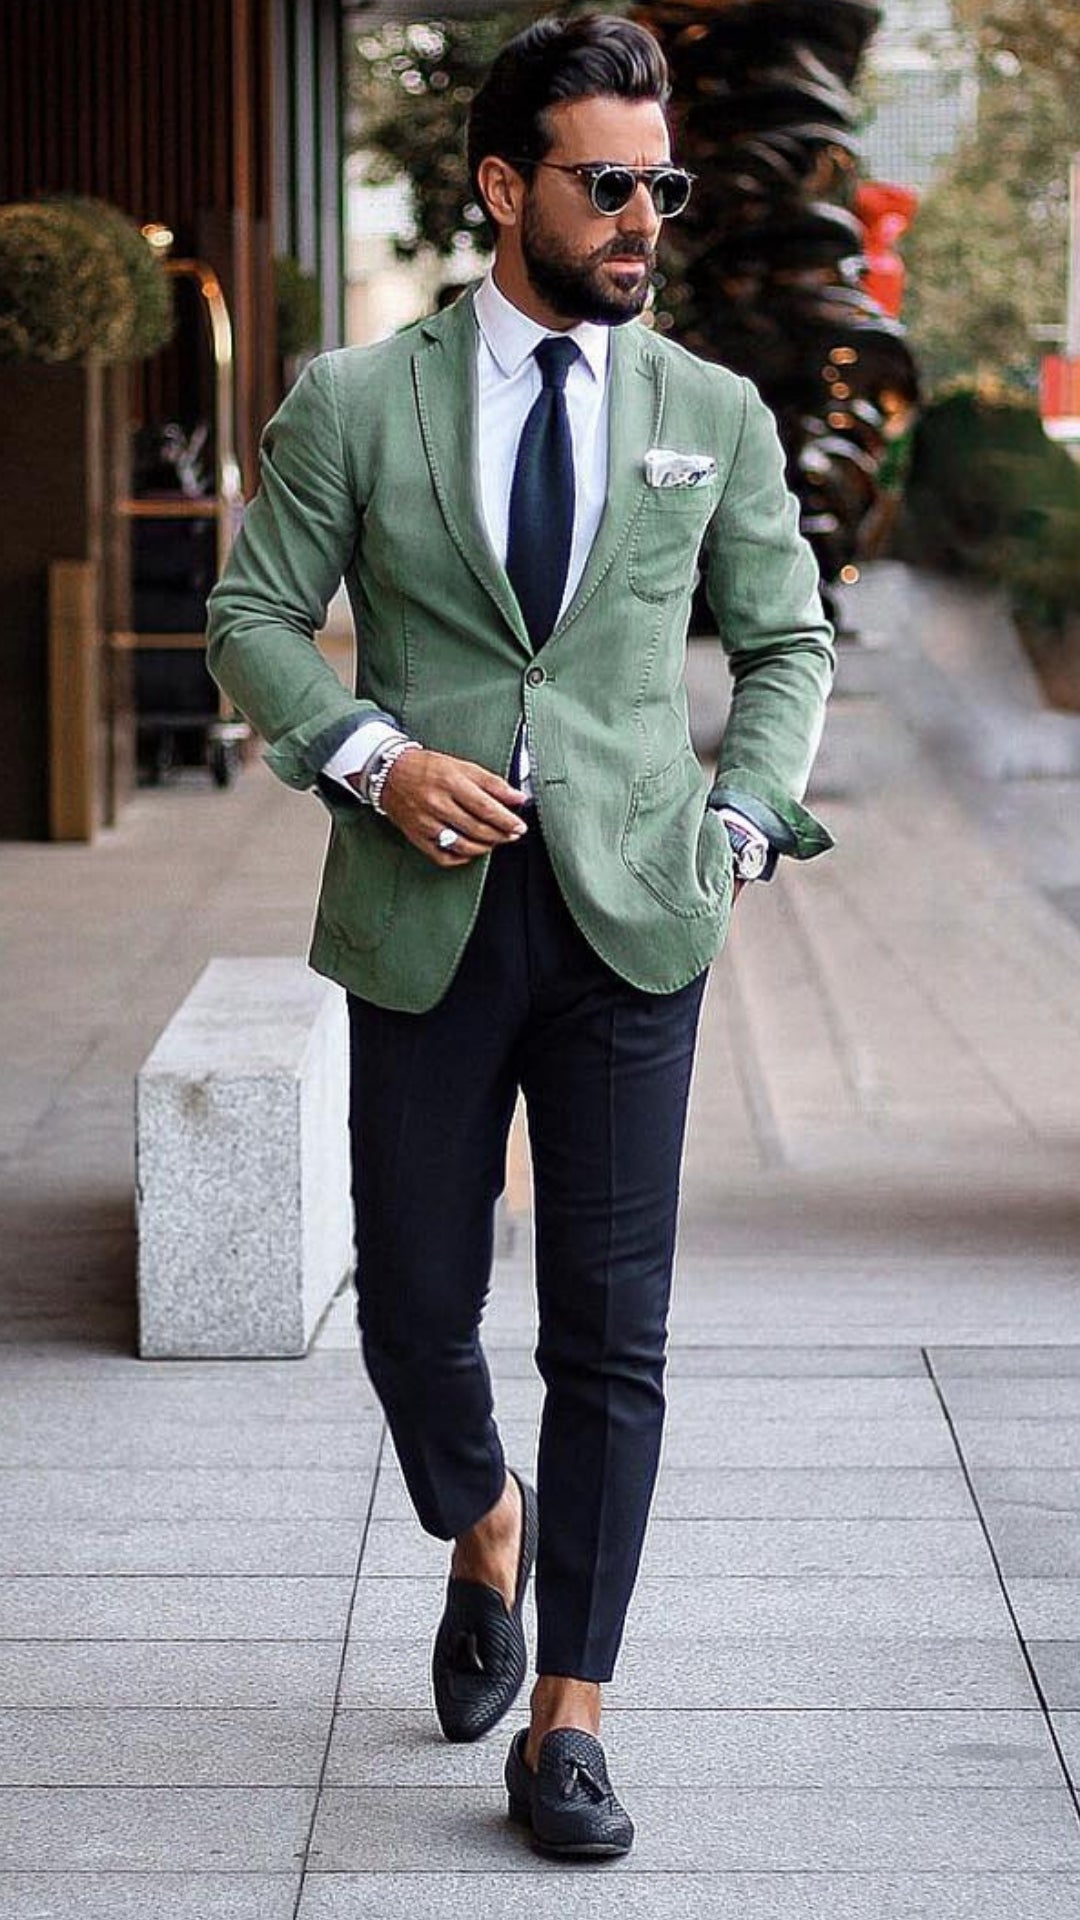 5 Unconventional Blazer Colours That Breaks All The Rules Of Fashion B ...